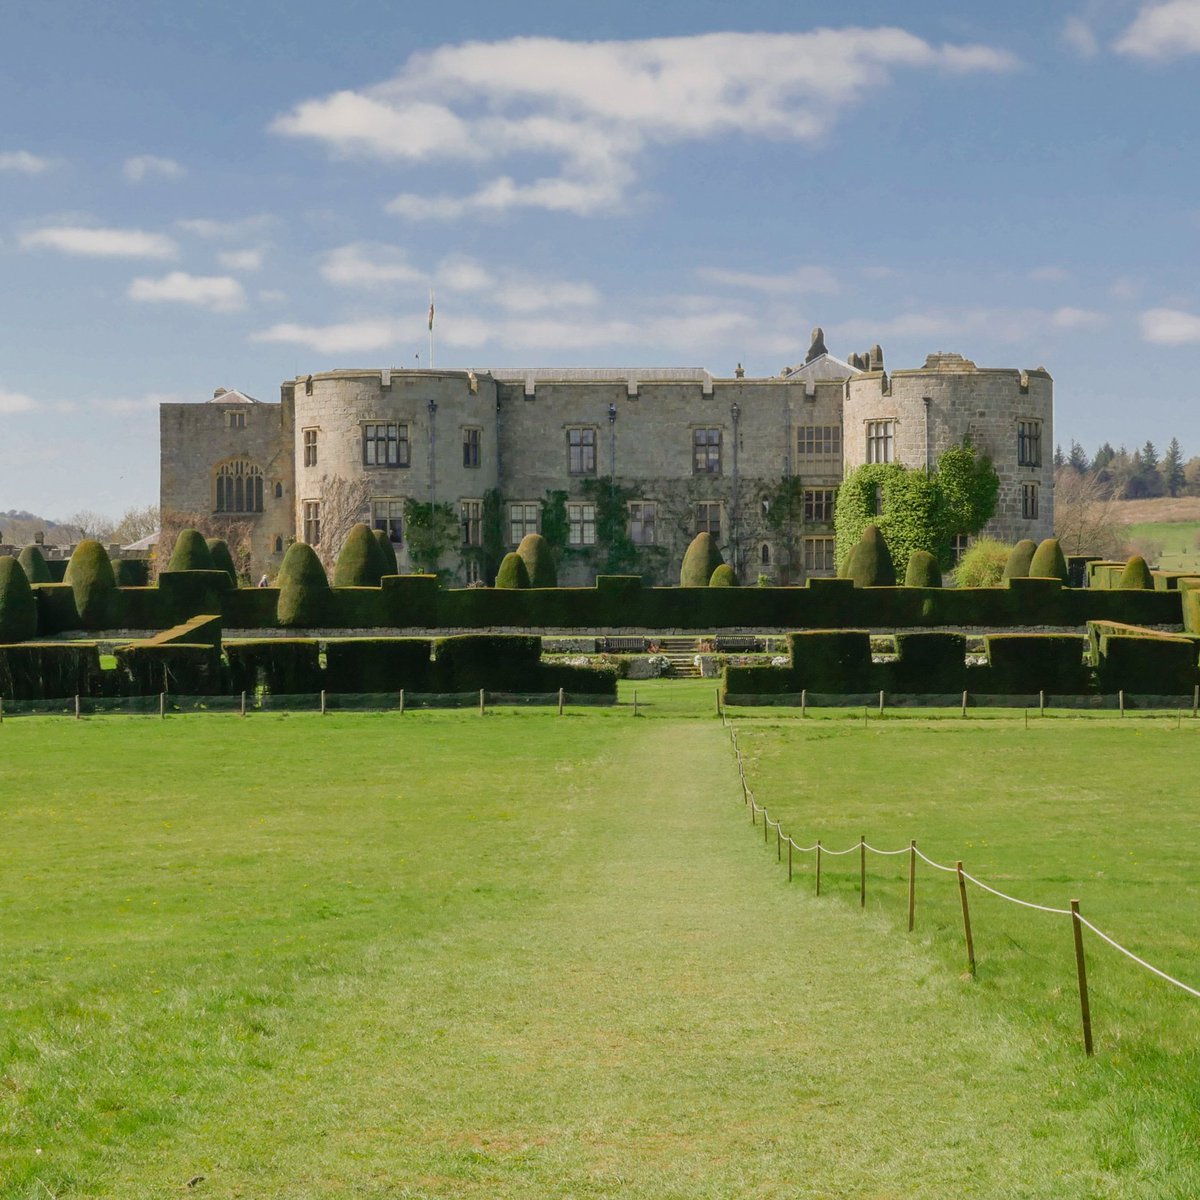 Built in the 13th century, @ChirkCastleNT was one of several fortresses established along the Welsh-English border. It was considered so important that King Edward I himself paid a visit during its construction. Discover more about its history here: bit.ly/2xhyoiU